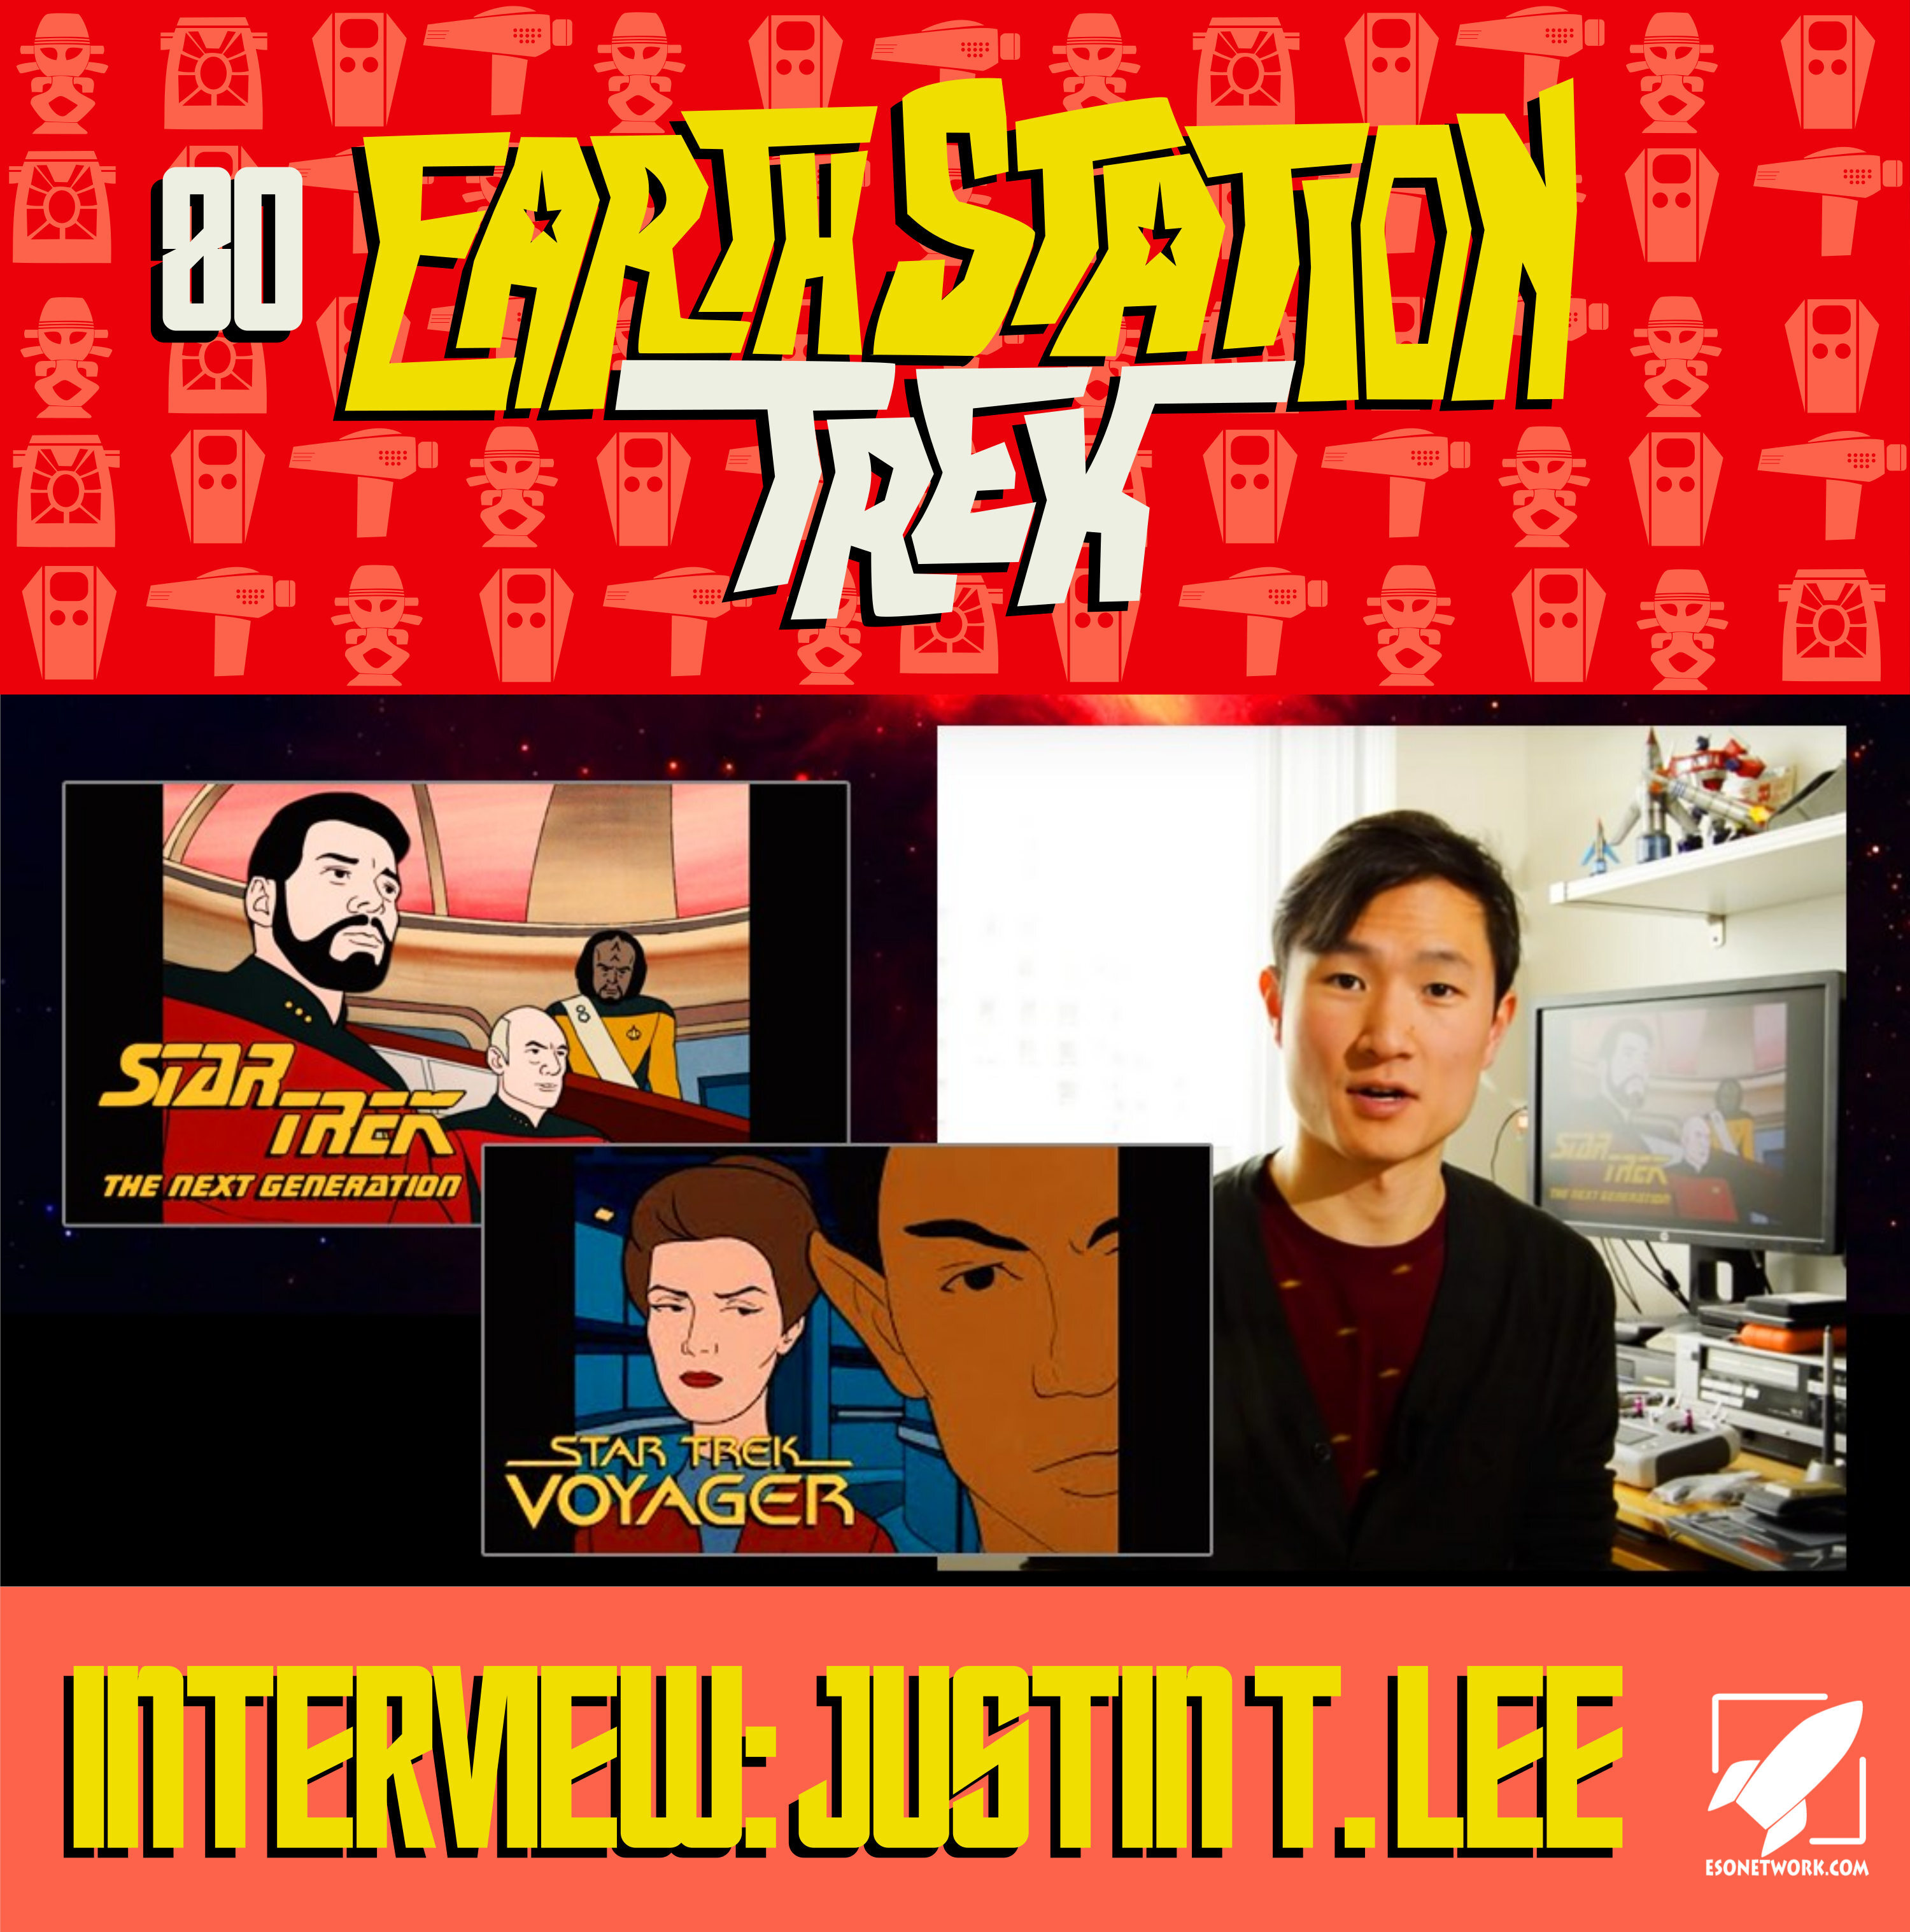 Justin_T_Lee_podcast_graphic90yzq.jpg